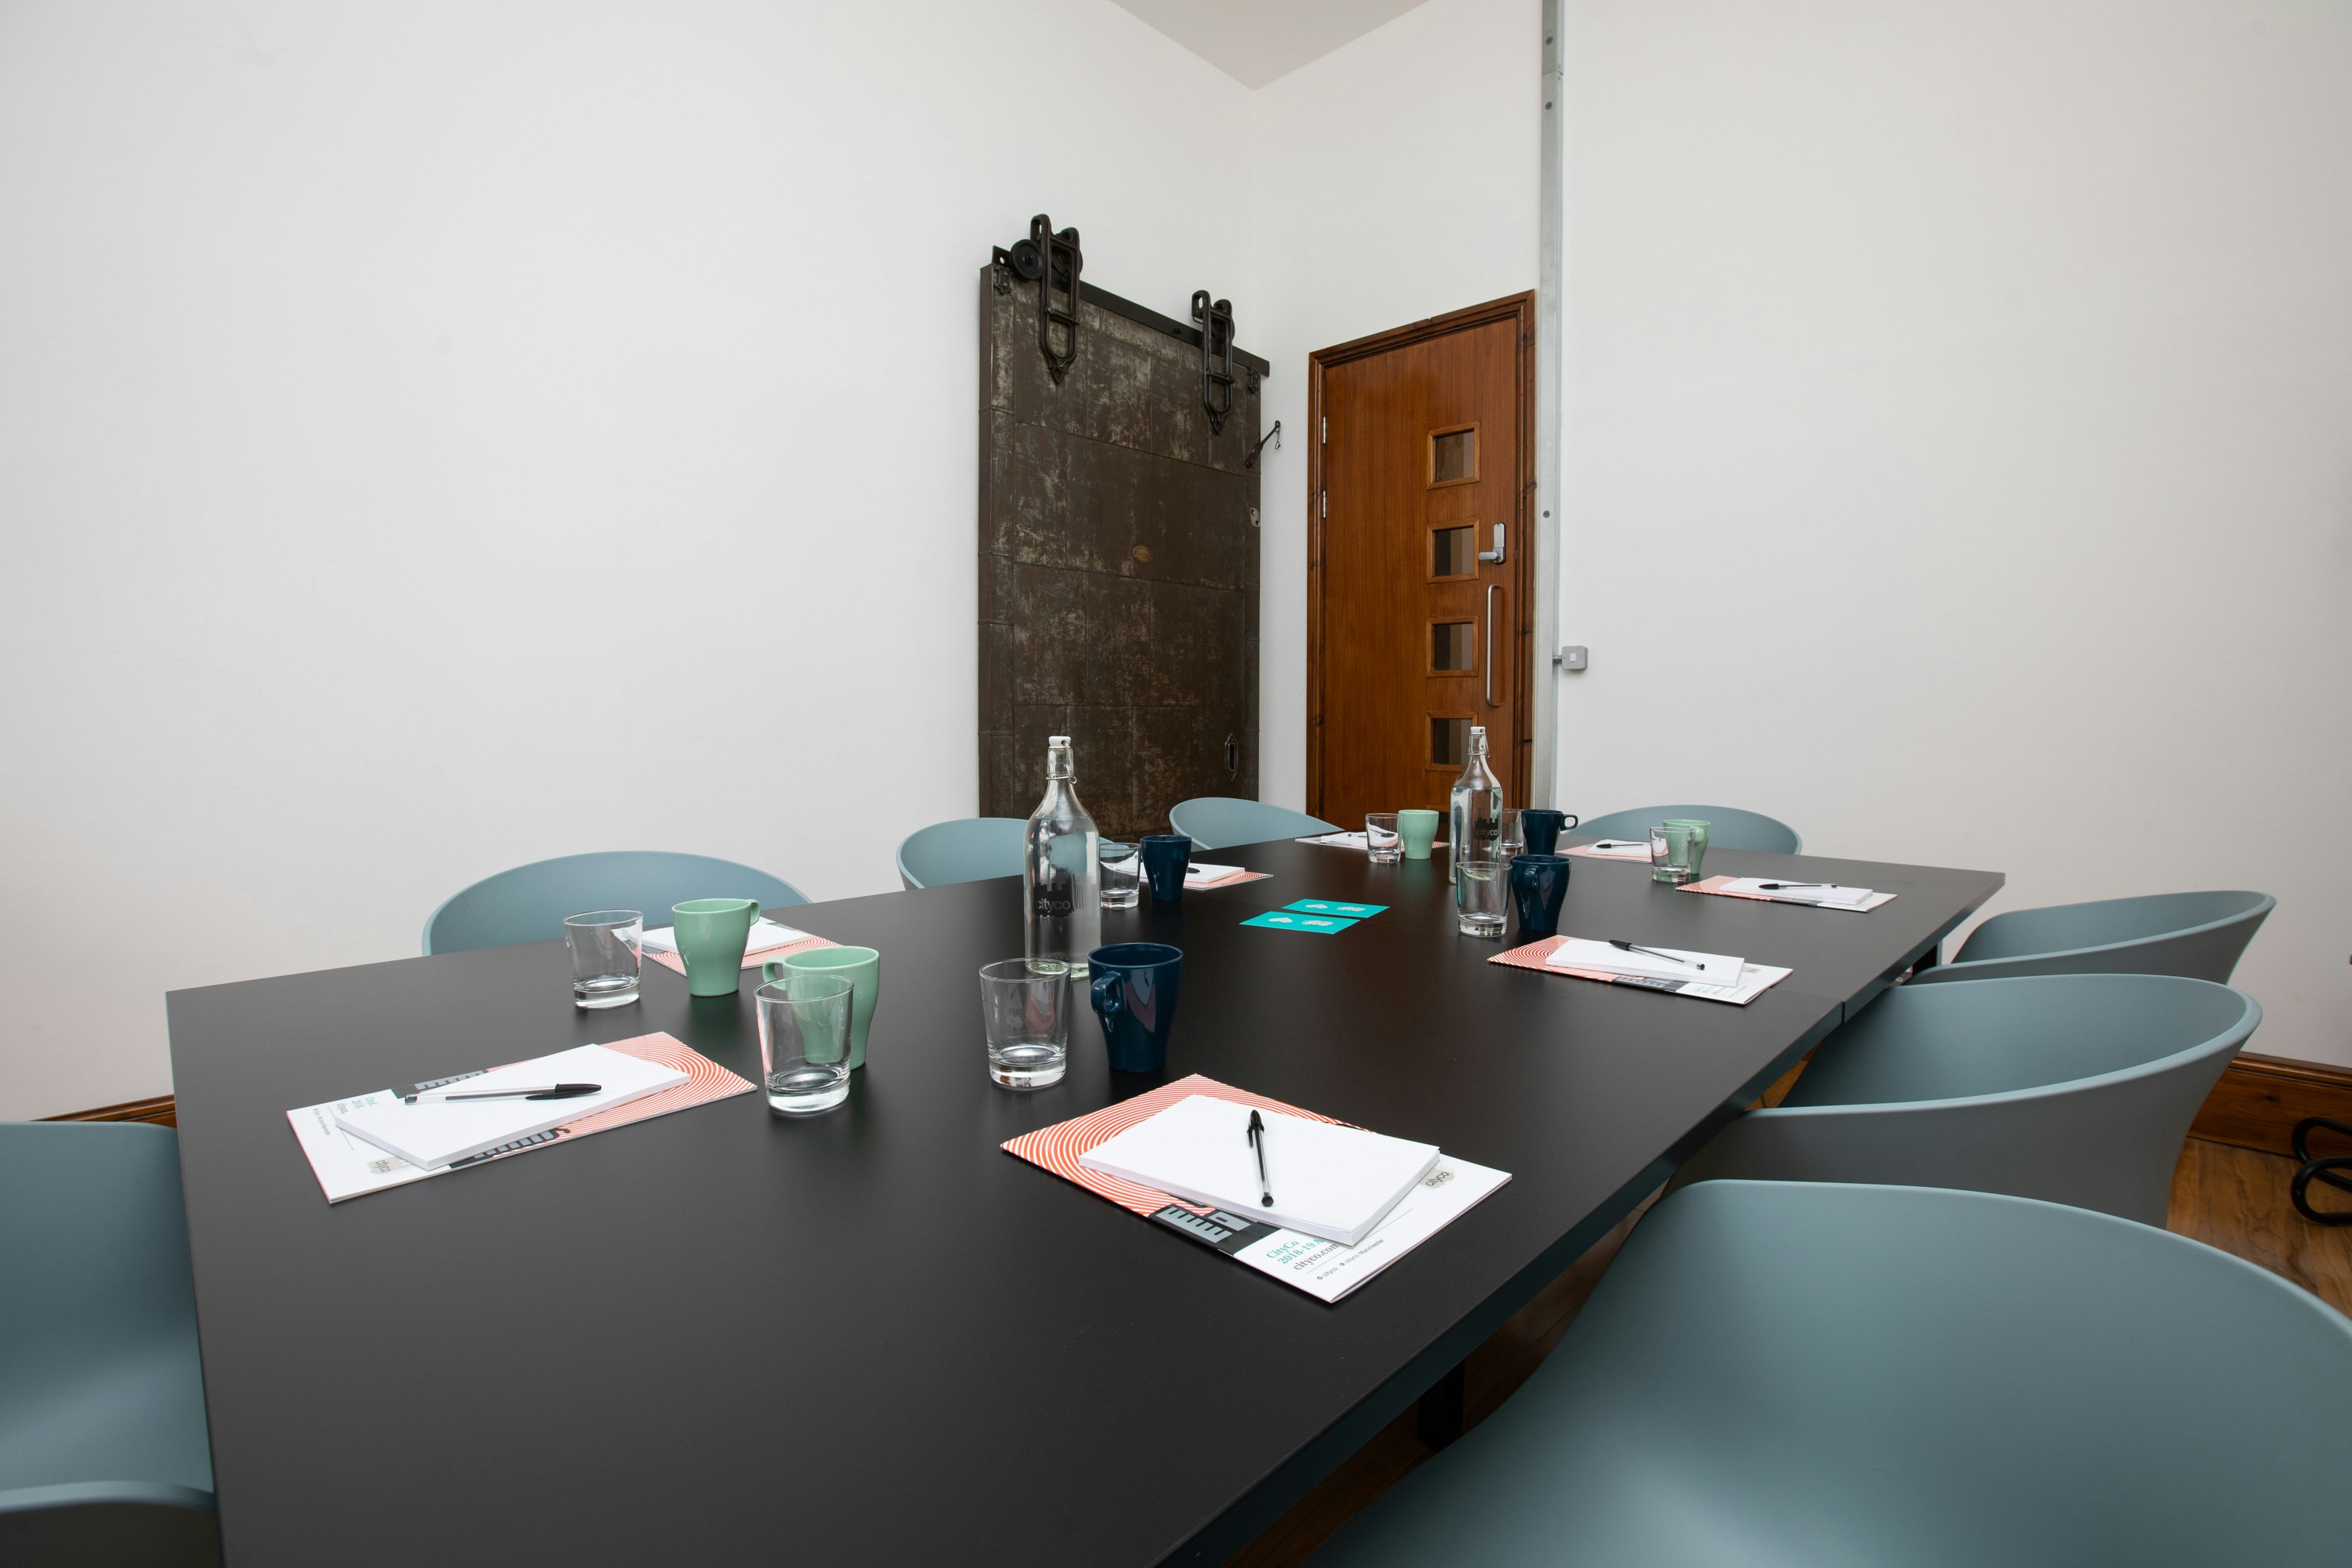 CityCo Manchester: Event & Meeting Spaces - The Sorting Room image 1